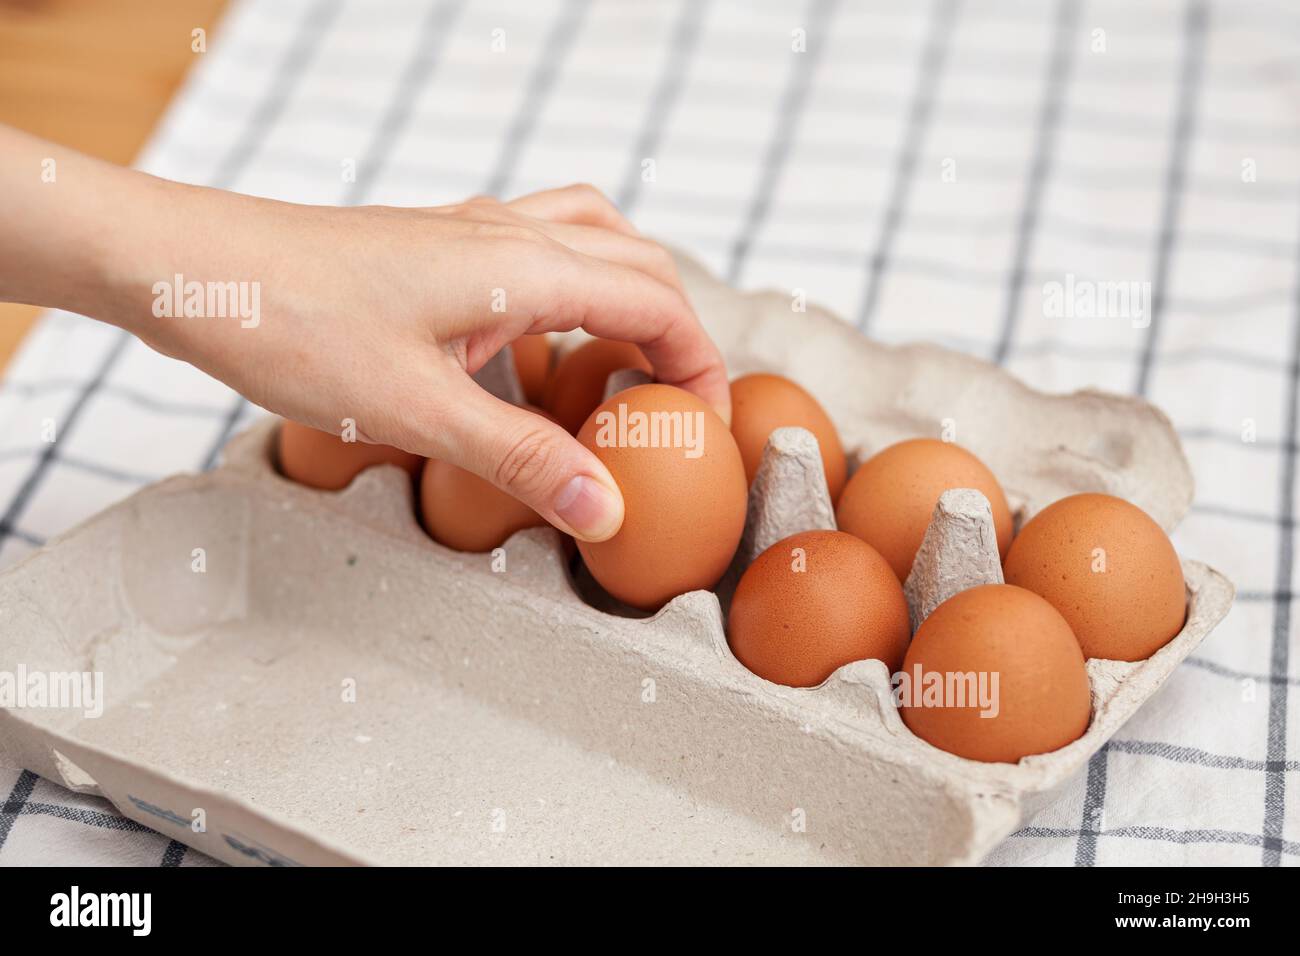 Chicken brown eggs are in a cardboard box bought at a grocery store. Healthy breakfast. A tray for carrying and storing fragile eggs. Woman takes one Stock Photo